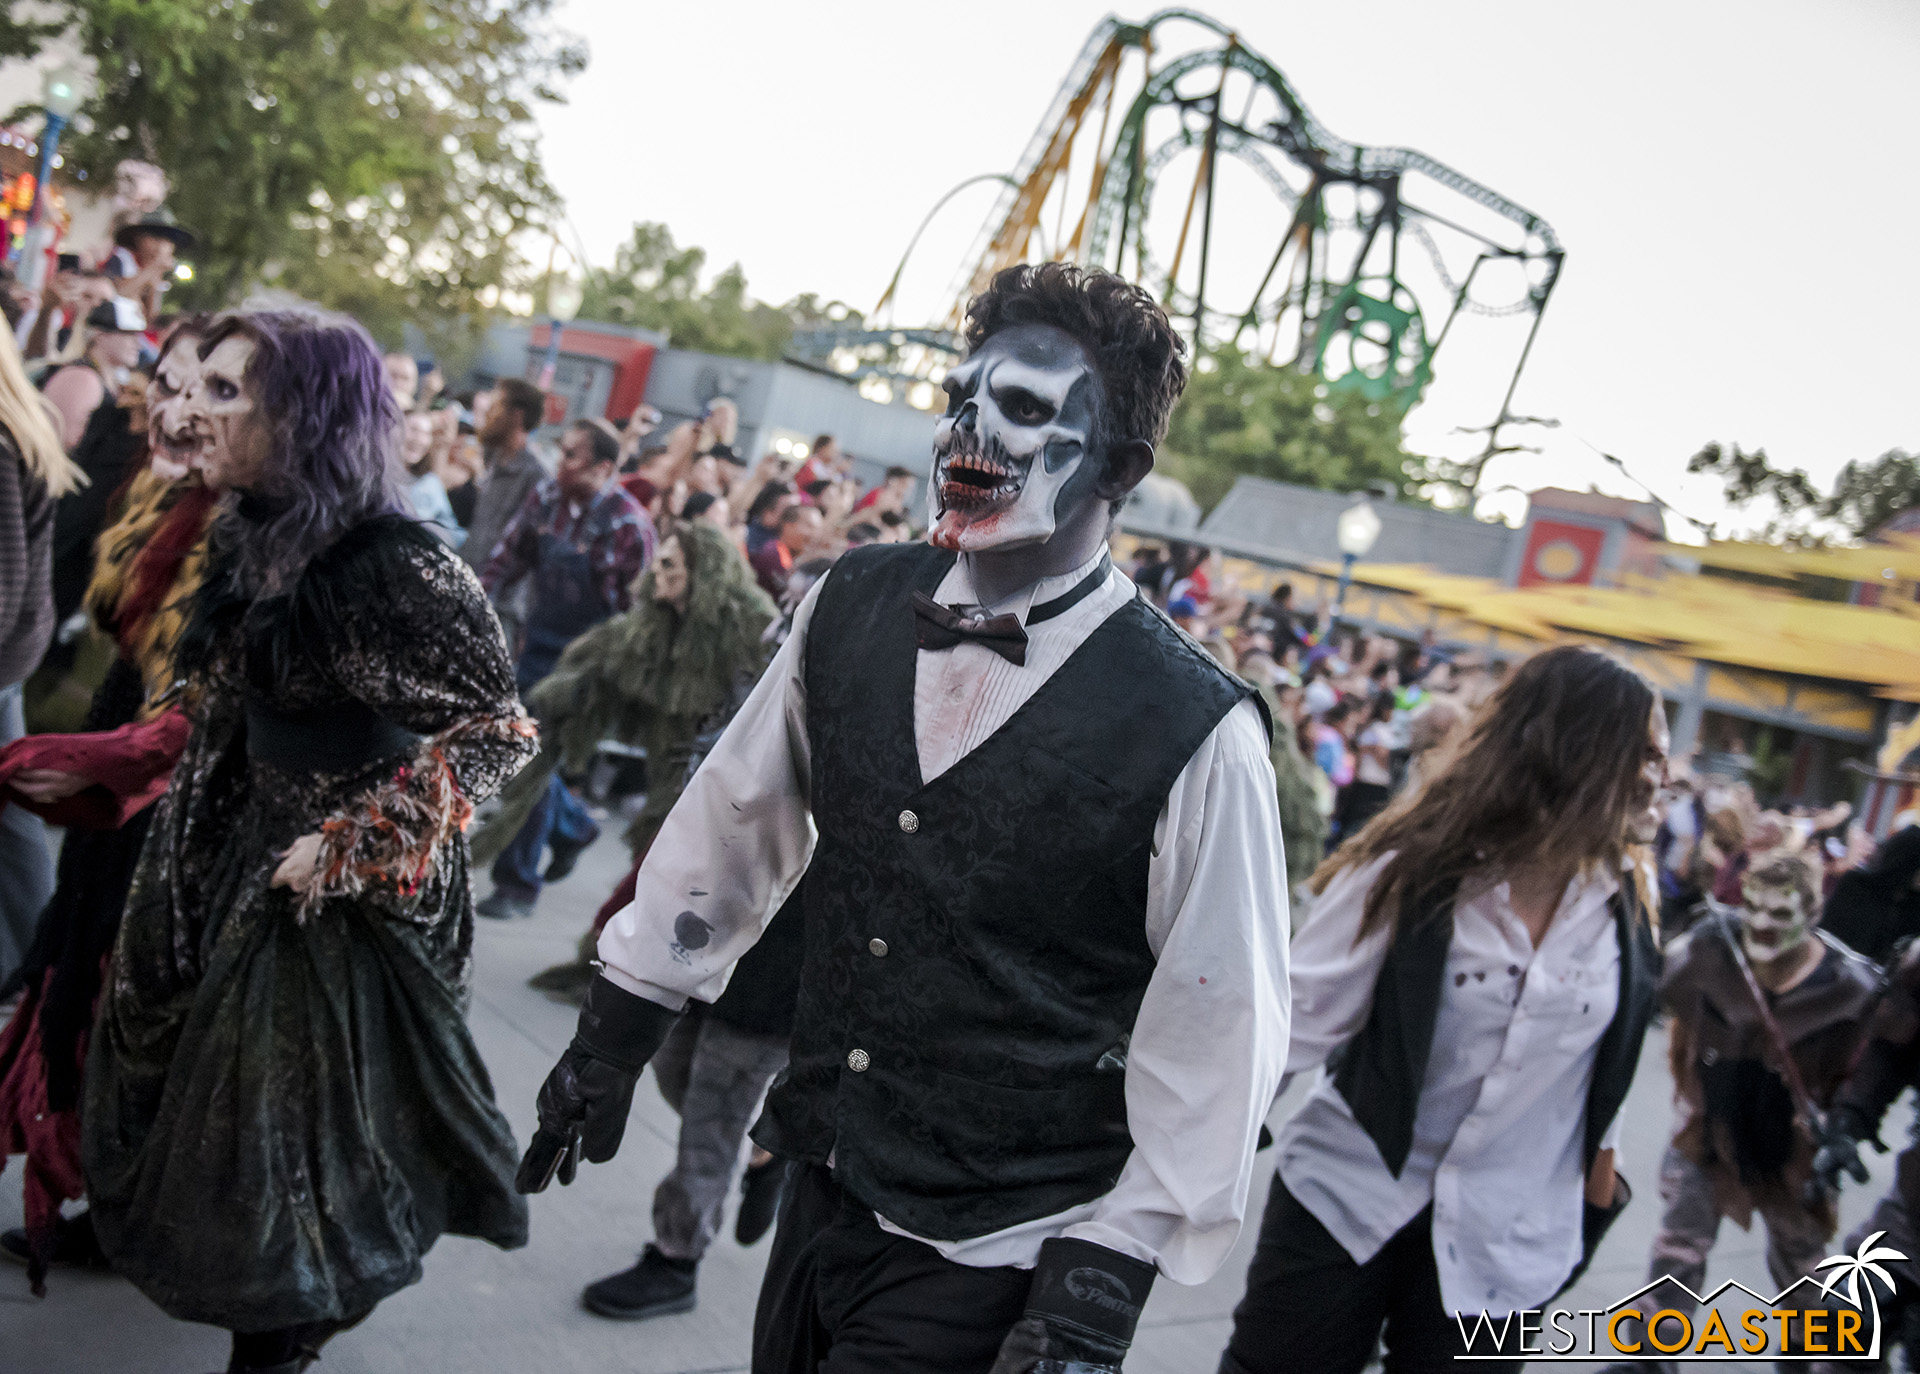  Much as they will at the end of the night, monsters of different scare zones start off together as they emerge. 